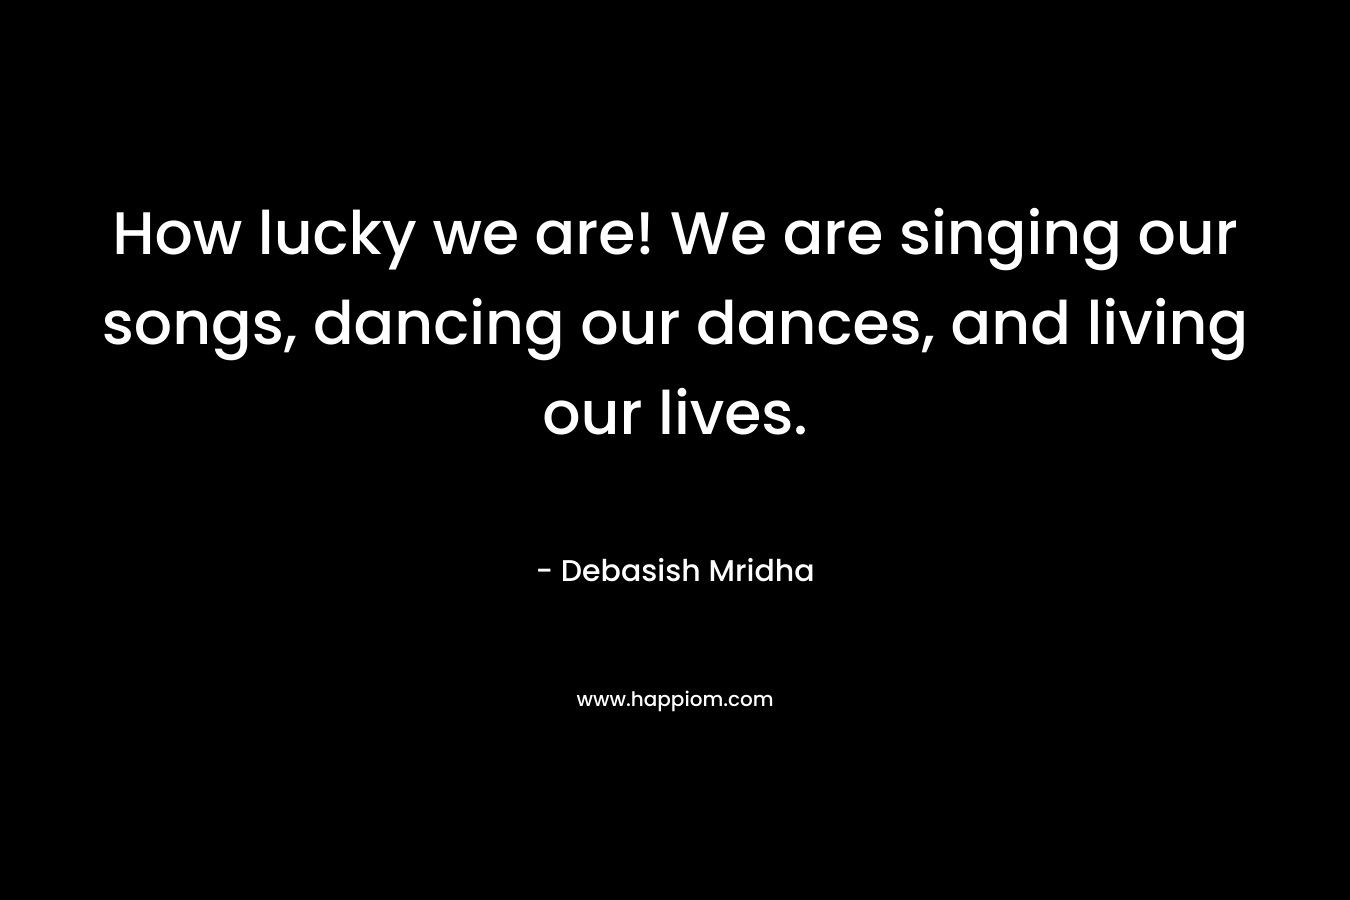 How lucky we are! We are singing our songs, dancing our dances, and living our lives.